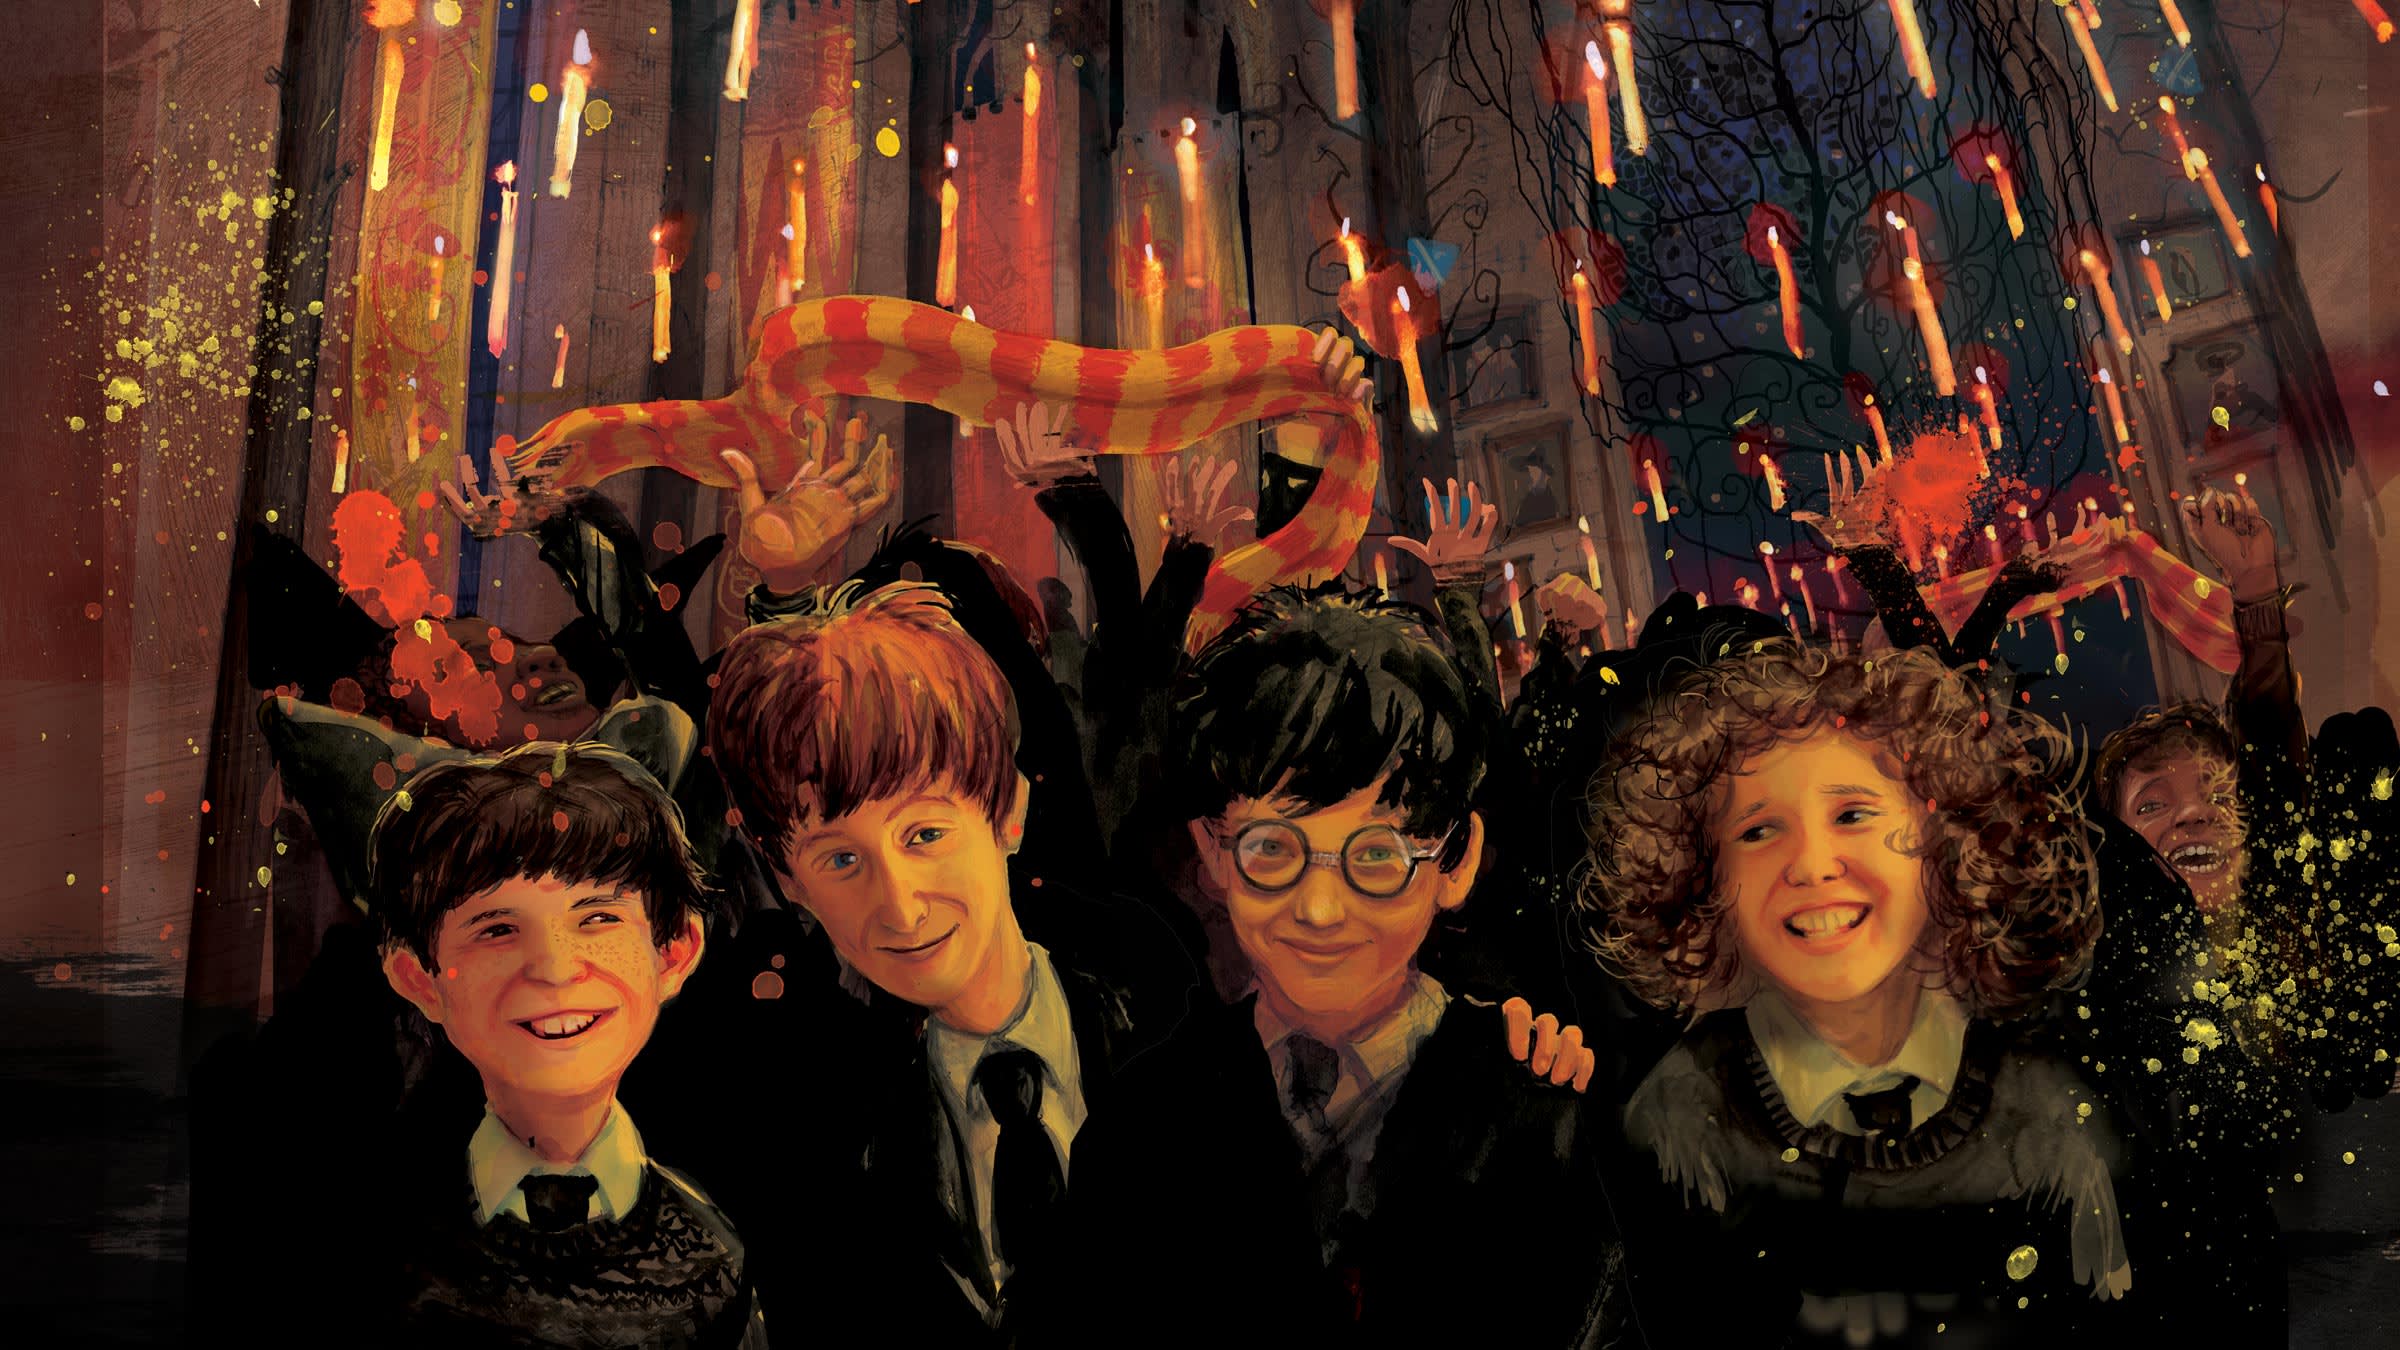 illustration-harry-ron-hermione-great-hall-feast-candles-image